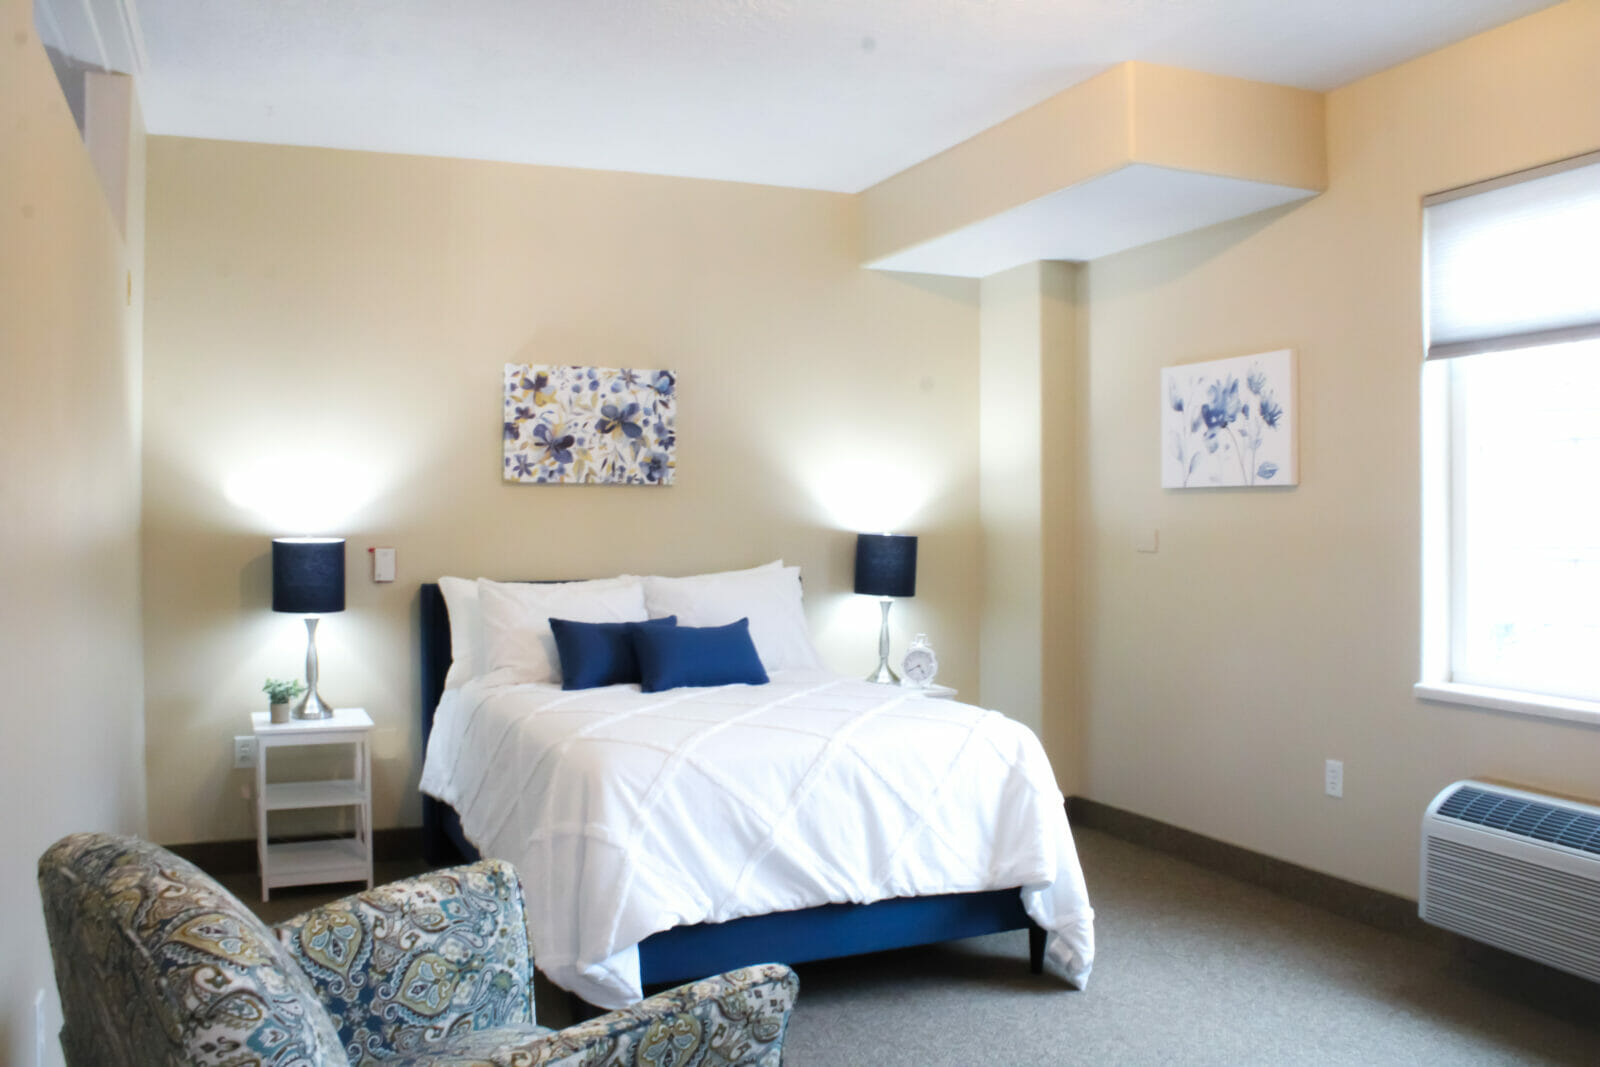 Southgate Senior Living St. George Utah Assisted Living and Memory Care bedroom apartment